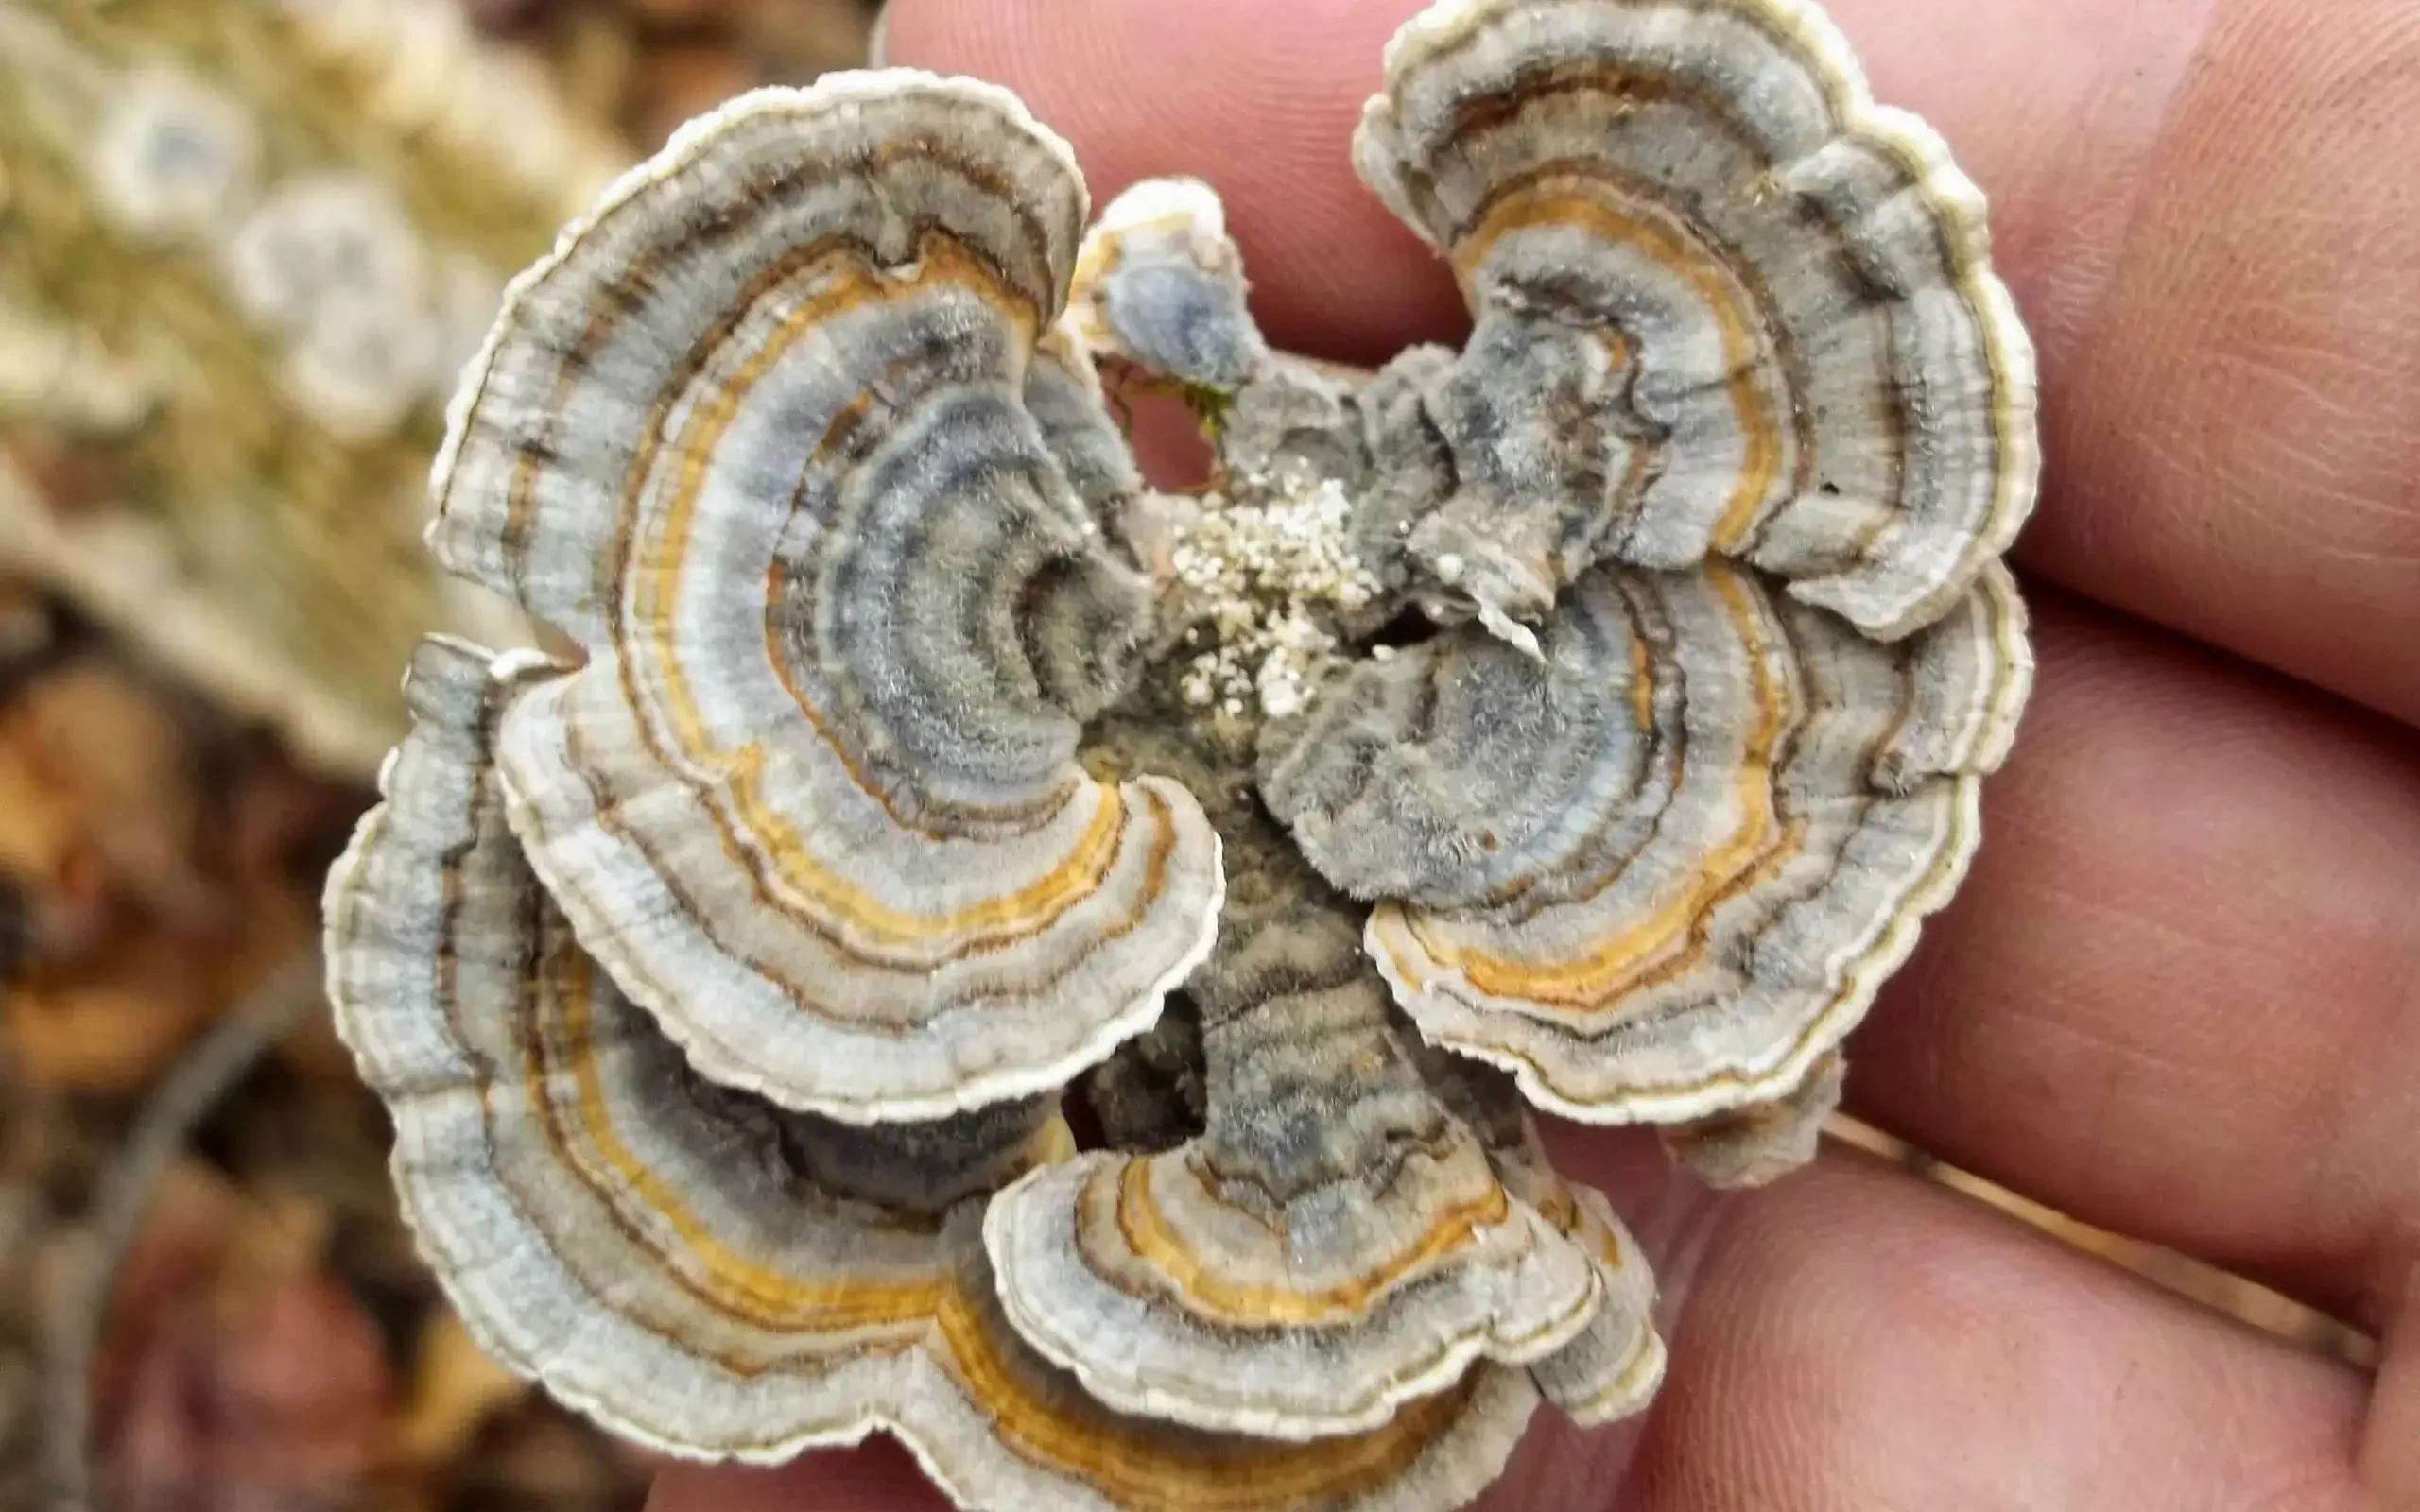 Turkey tail mushroom freshly picked and hold in a hand